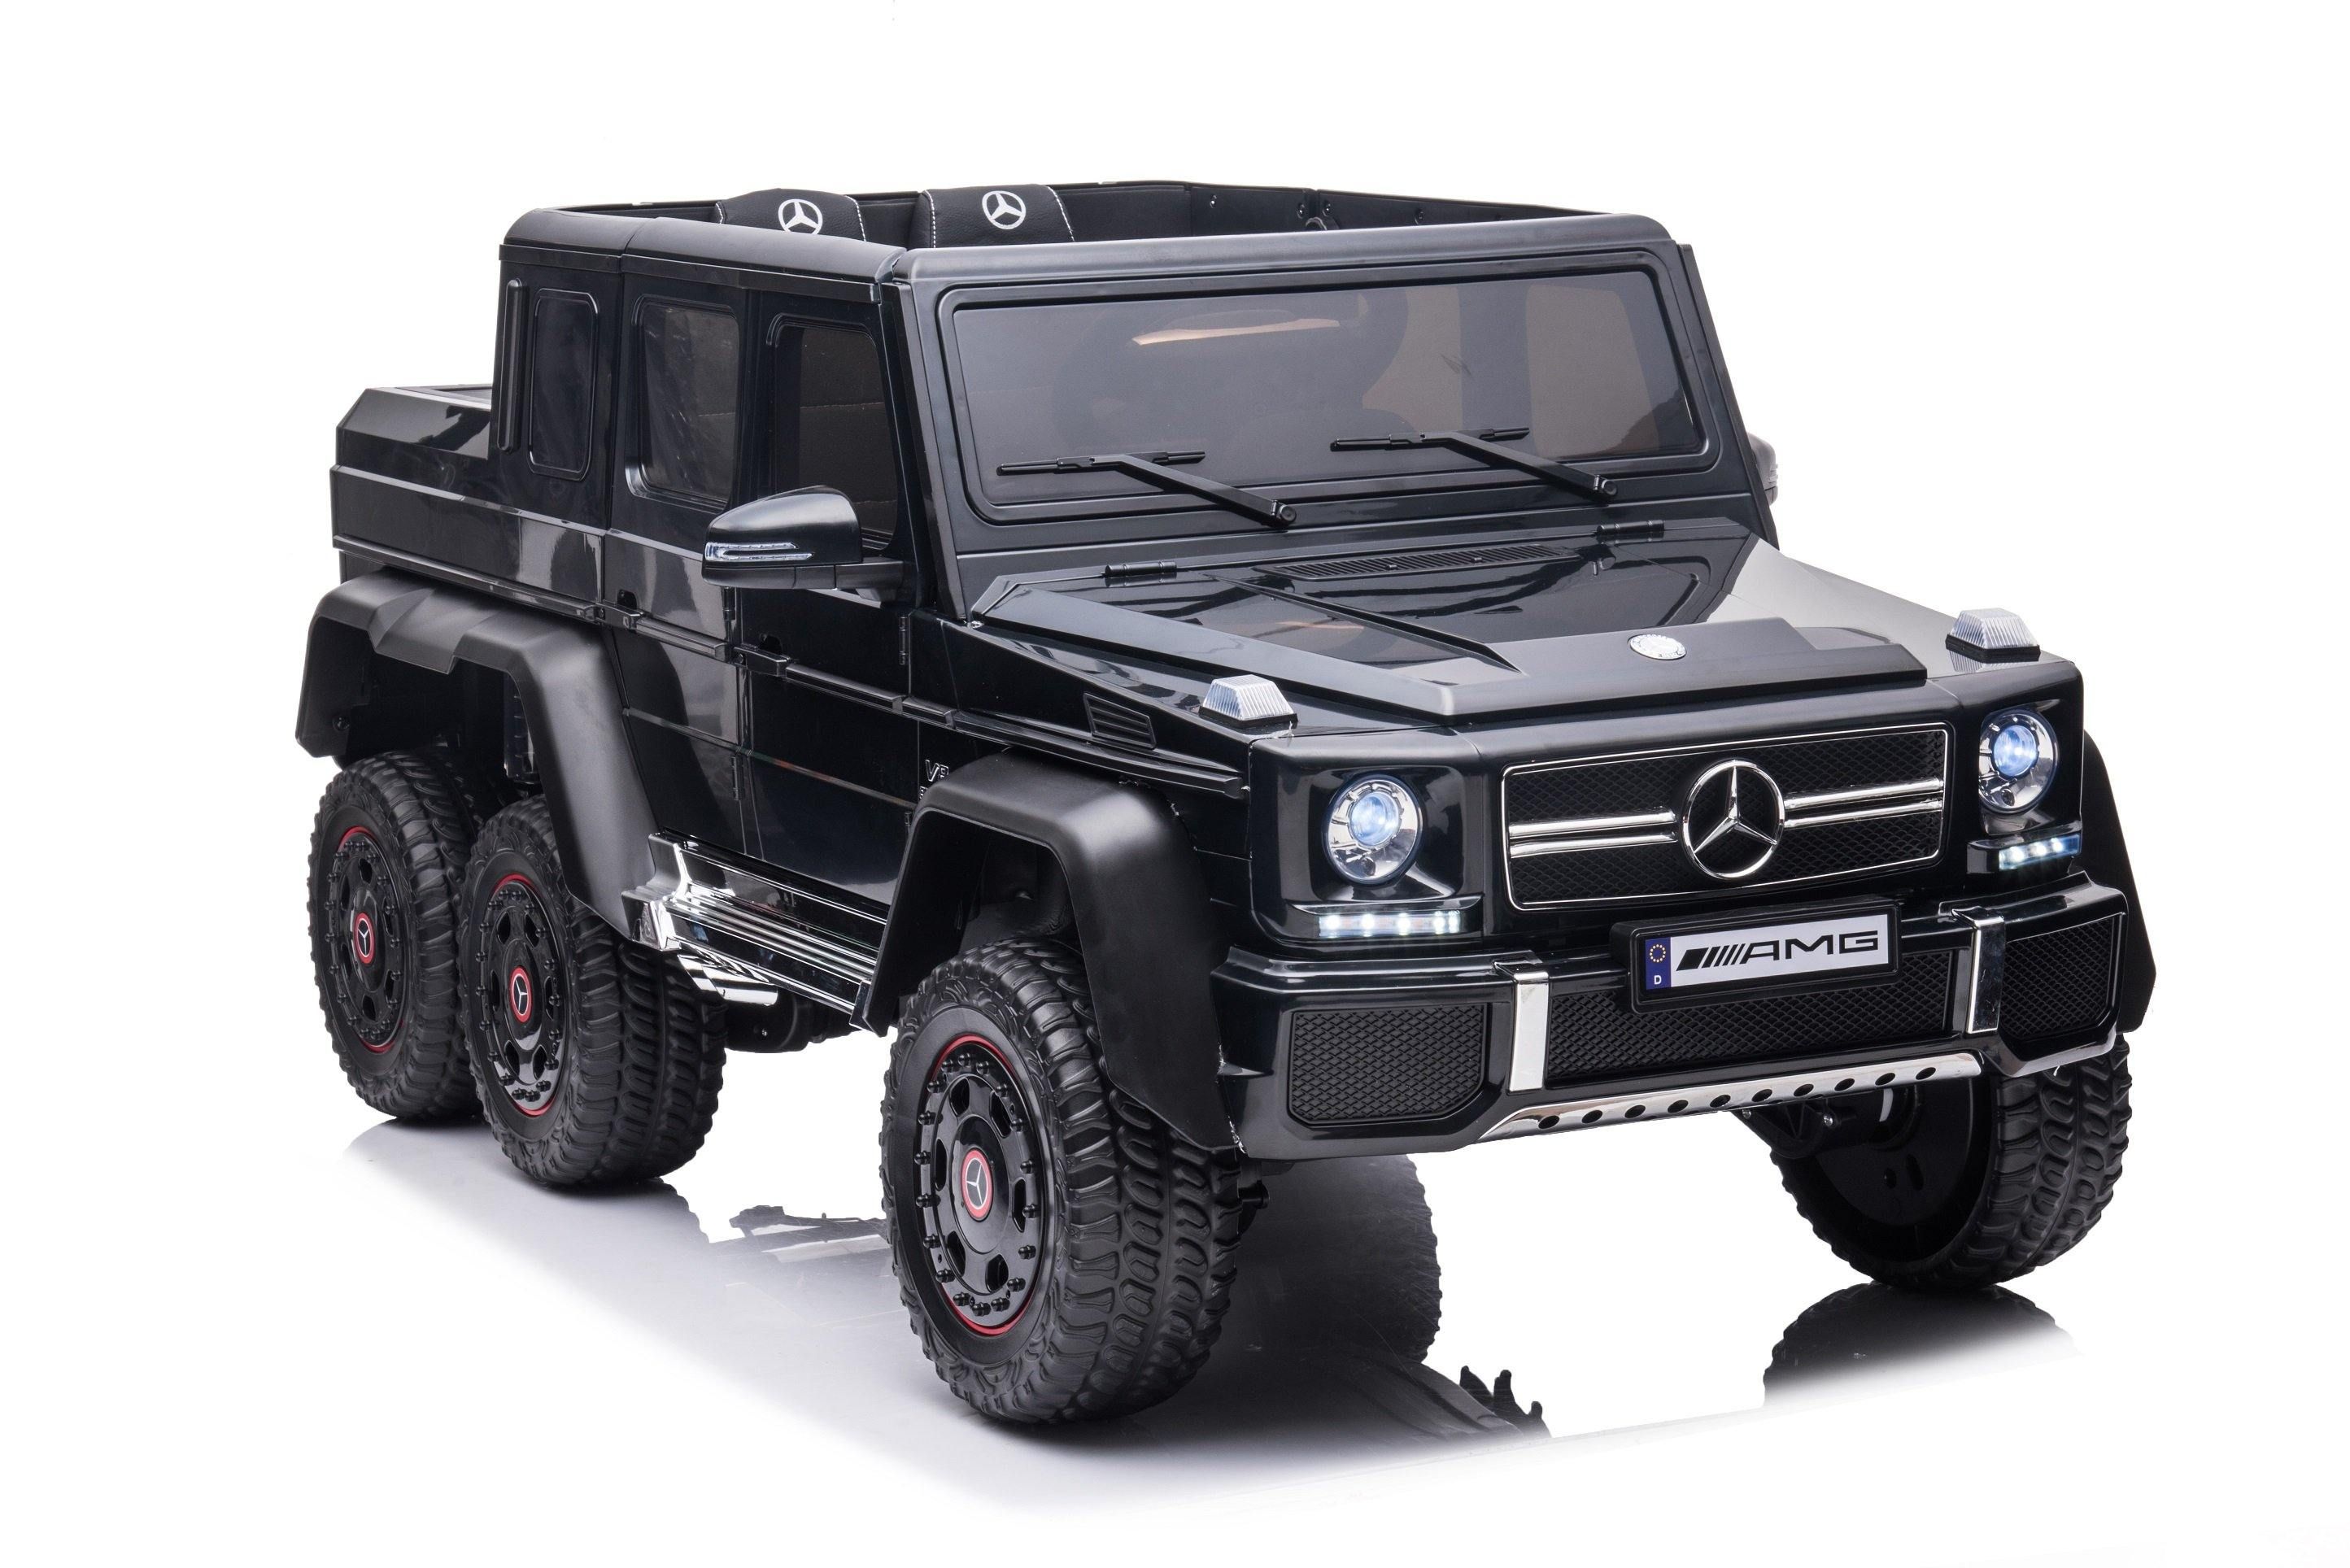 24V 6x6 Mercedes Benz G63 6 Wheels 1 Seater Ride on Car Kids Cars CA - Ride On Toys Store